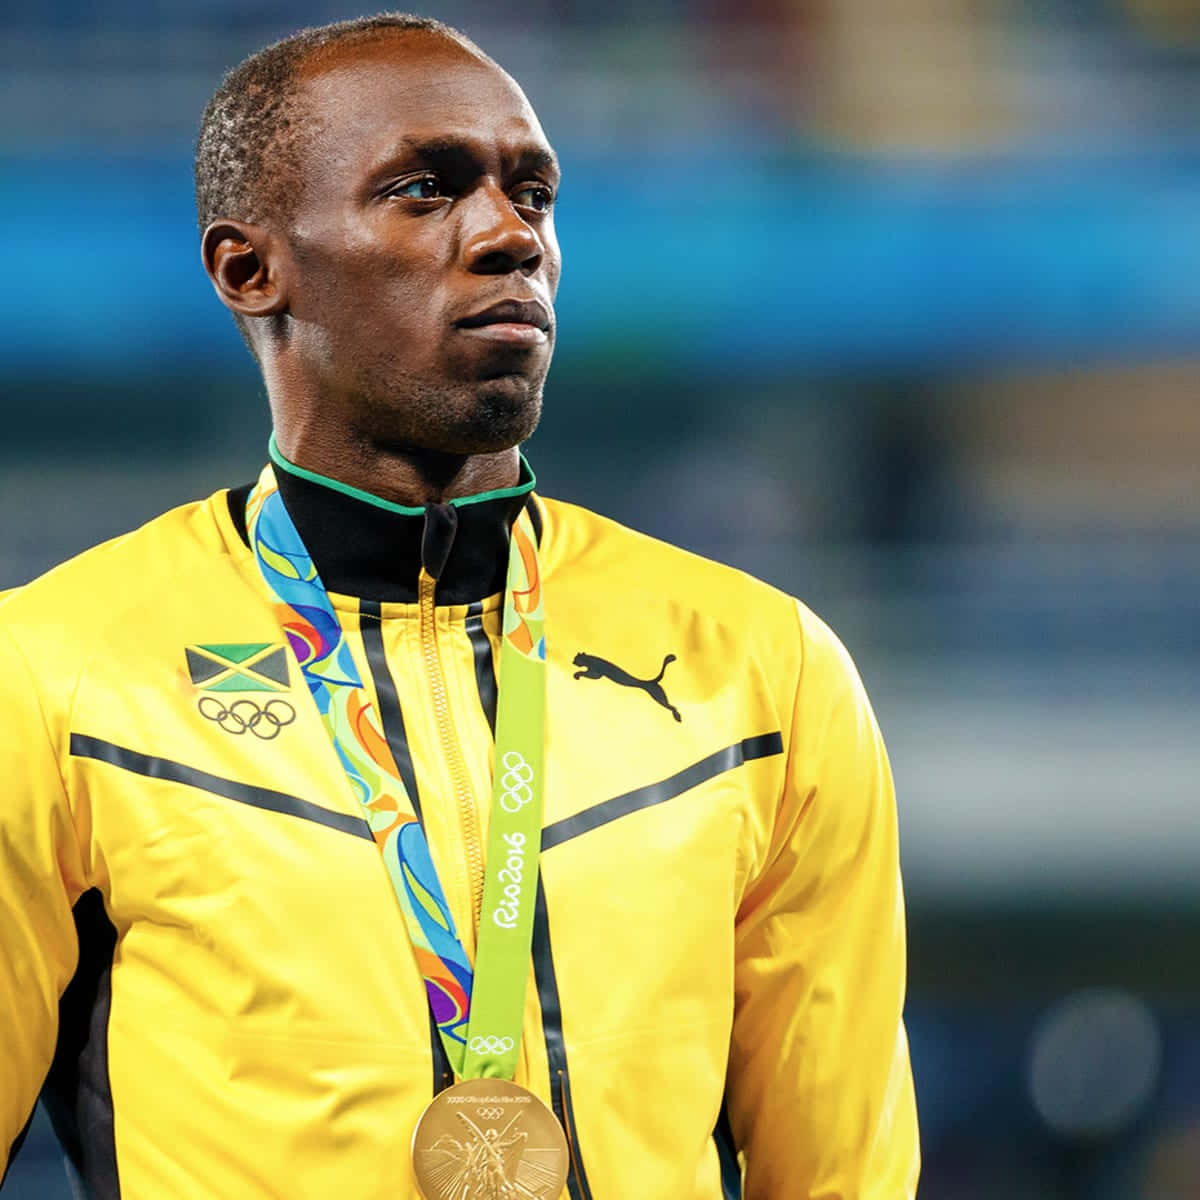 Jamaican Athlete Usain Bolt Looking Determined Wallpaper